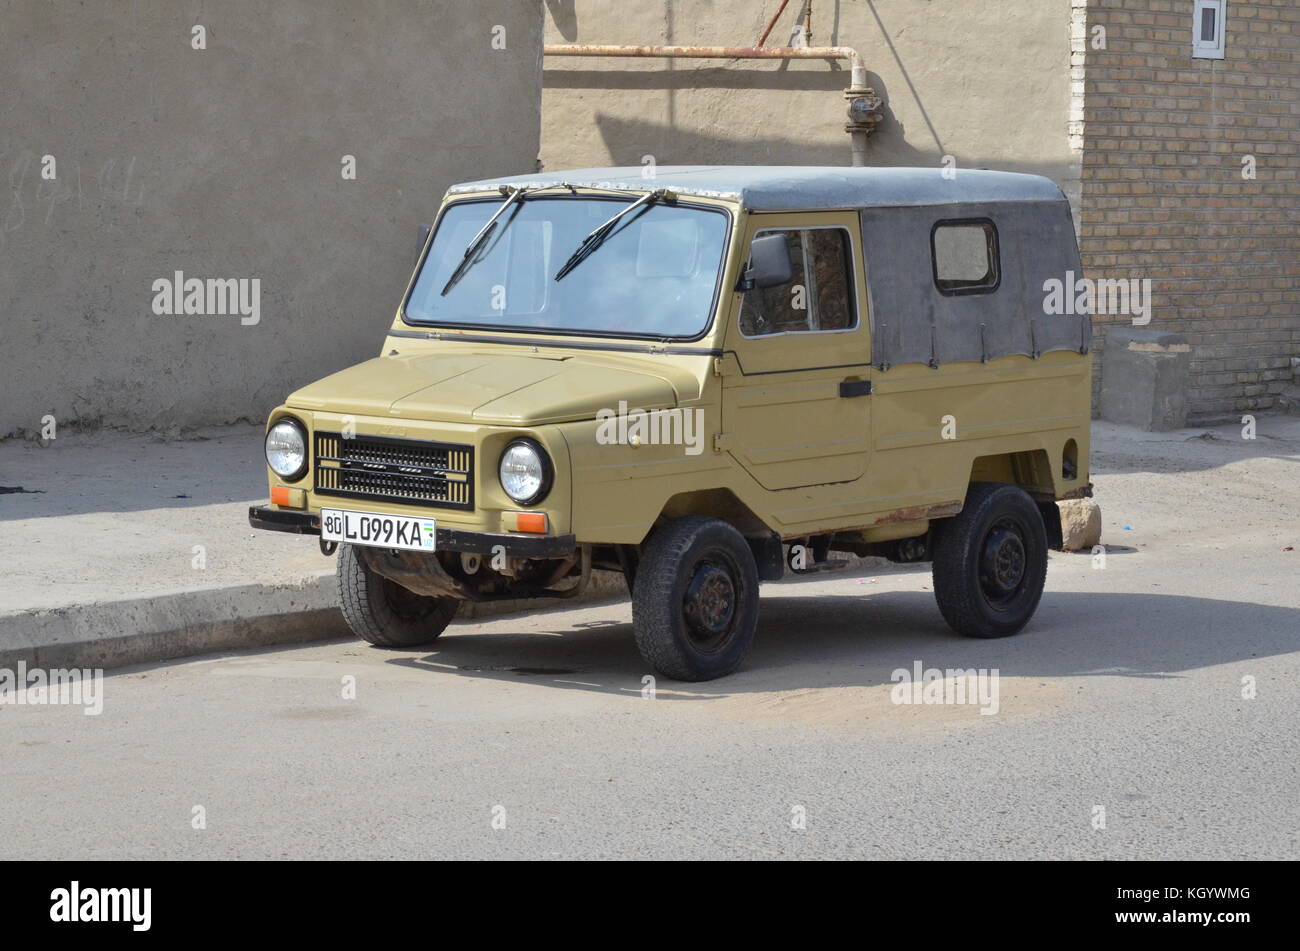 A beige Russian pick up truck with windshield wipers attached to the roof in Bukhara, Uzbekistan. Stock Photo